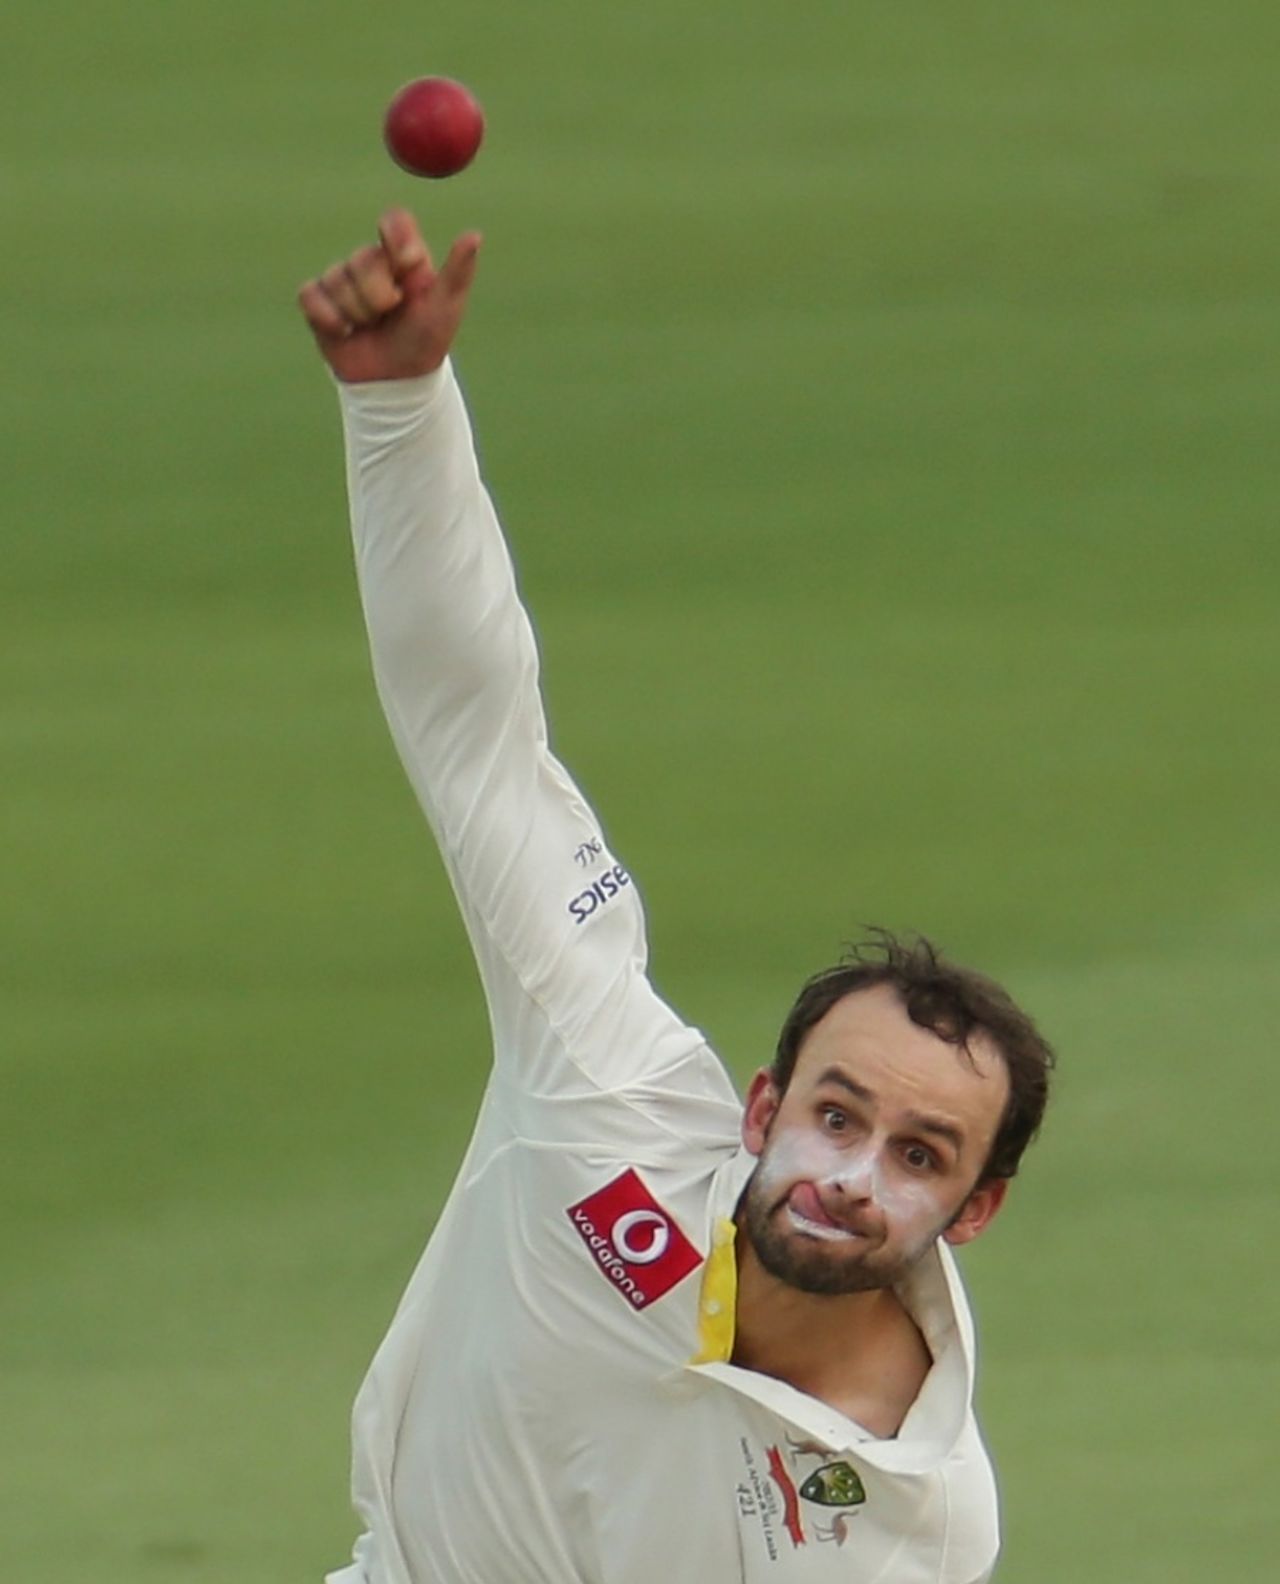 Nathan Lyon sends down a delivery, Australia v South Africa, 2nd Test, Adelaide, 3rd day, November 24, 2012